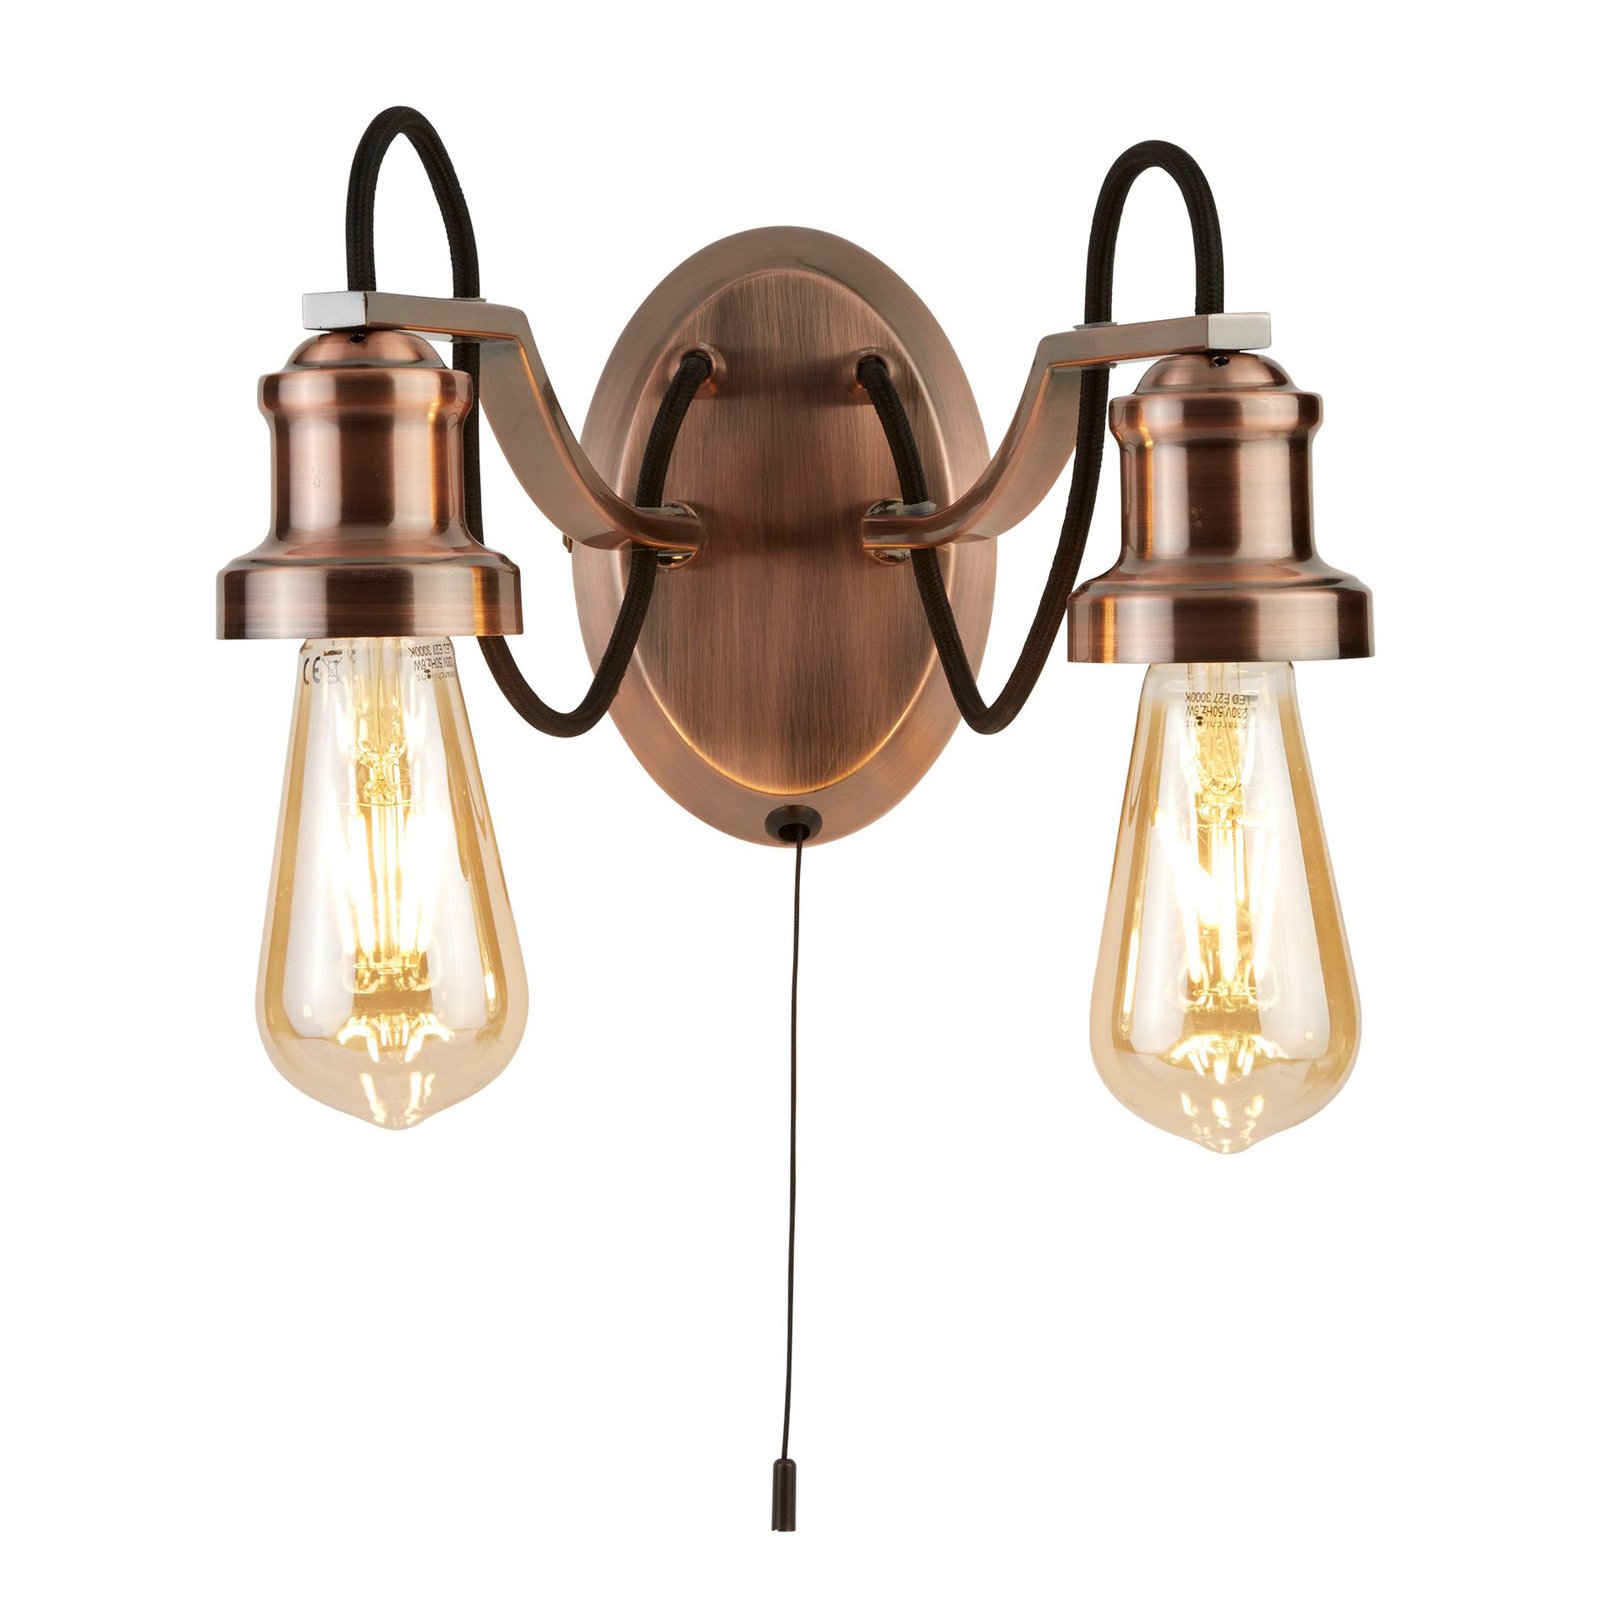 Olivia wall light, antique look with a switch